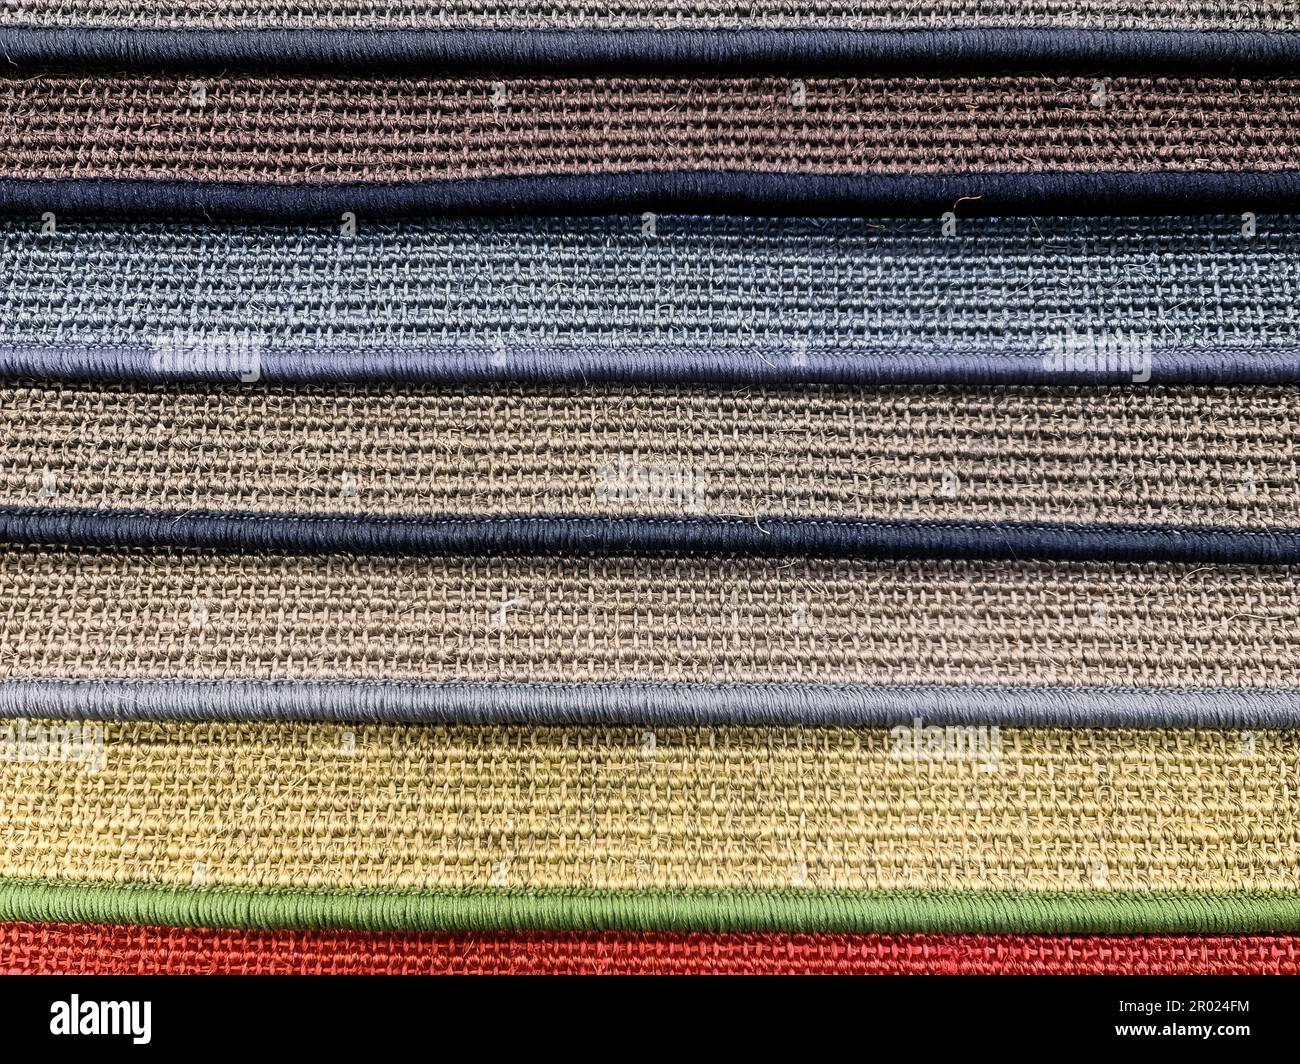 Colorful carpet samples background texture in high resolution Stock Photo